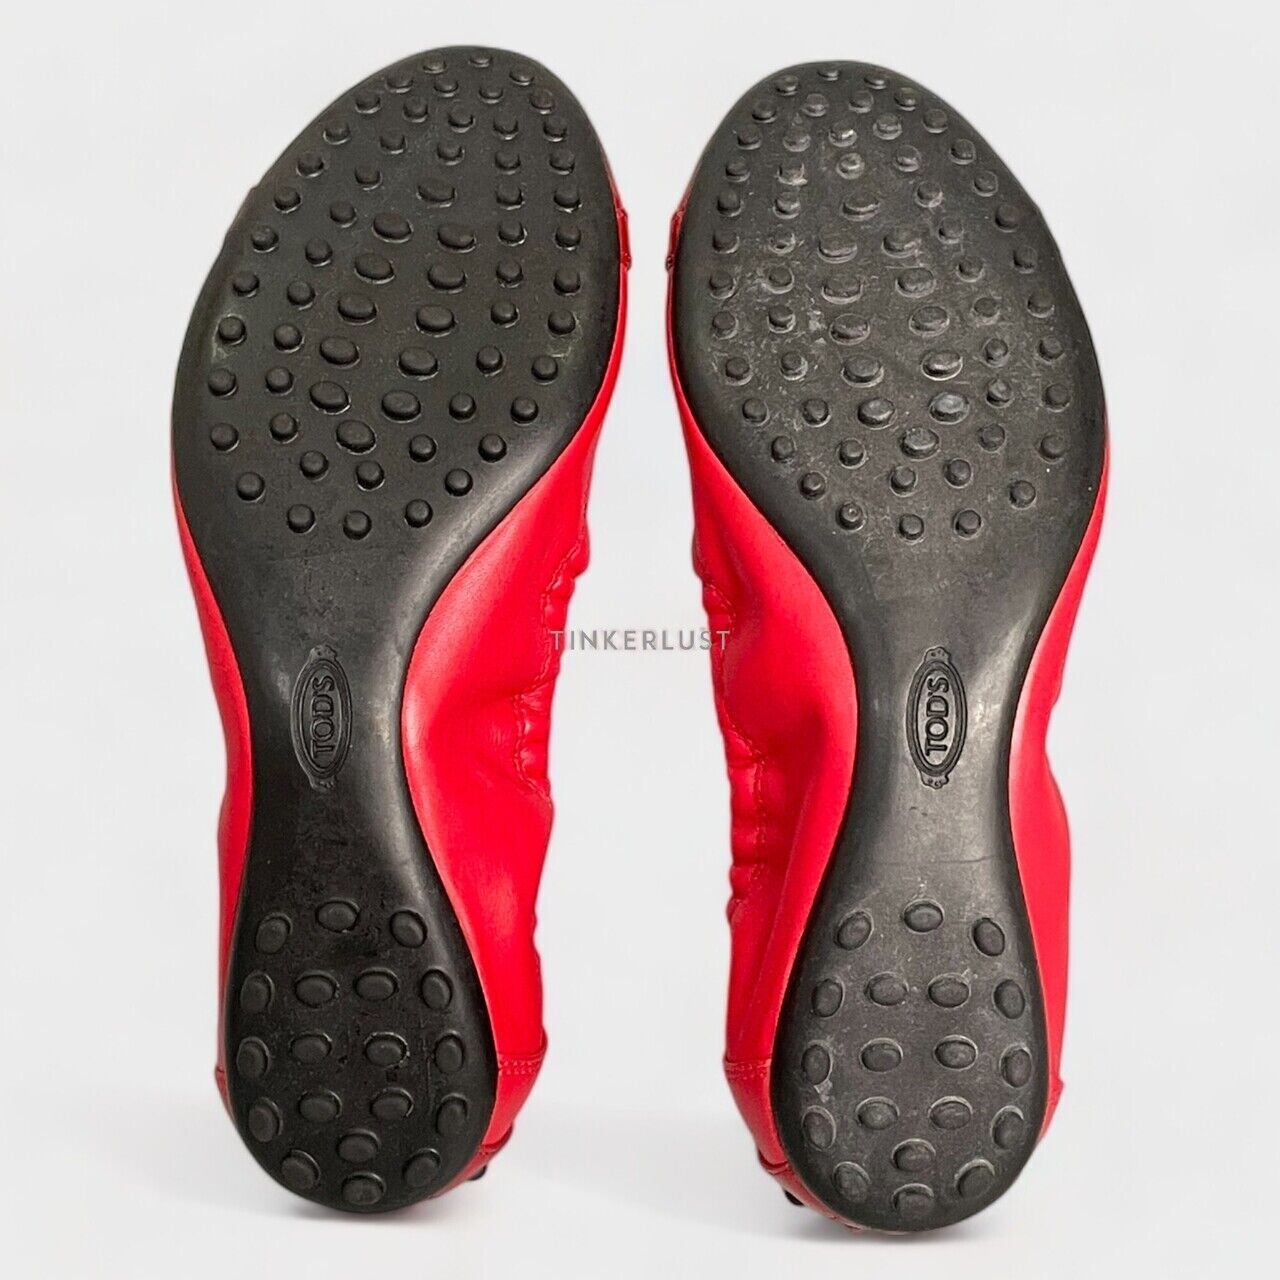 Tod's Red Flats